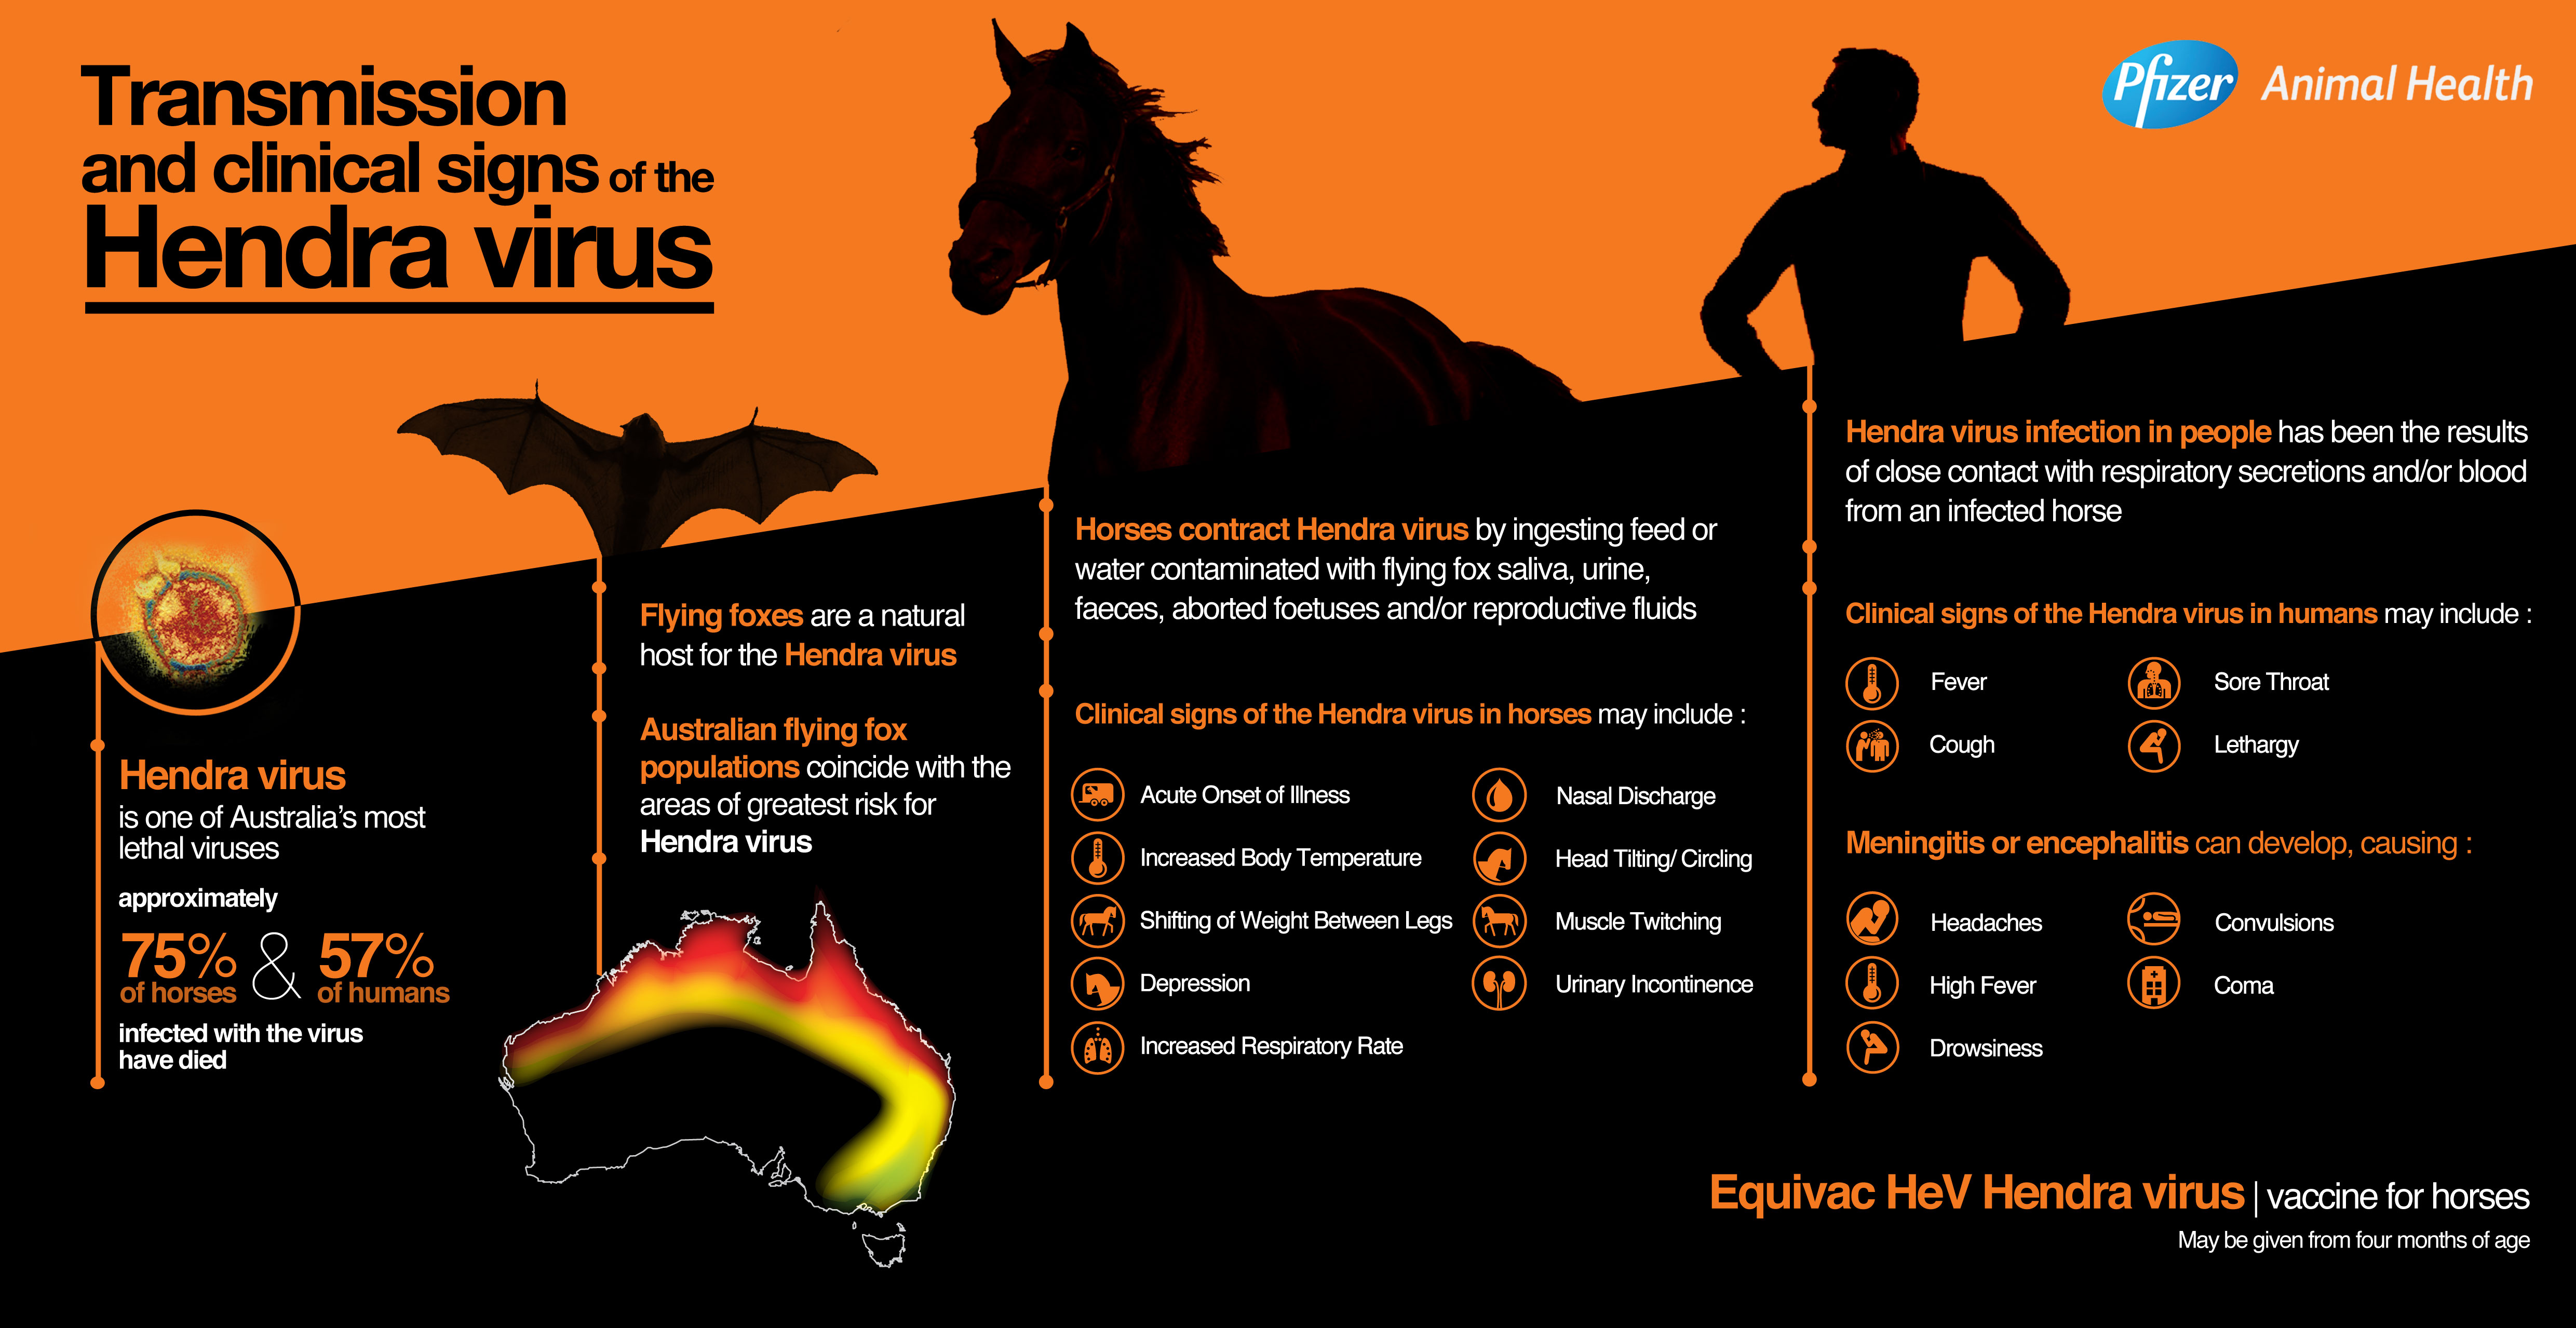 Info graphic showing details of the transmission and clinical signs of the Hendra Virus